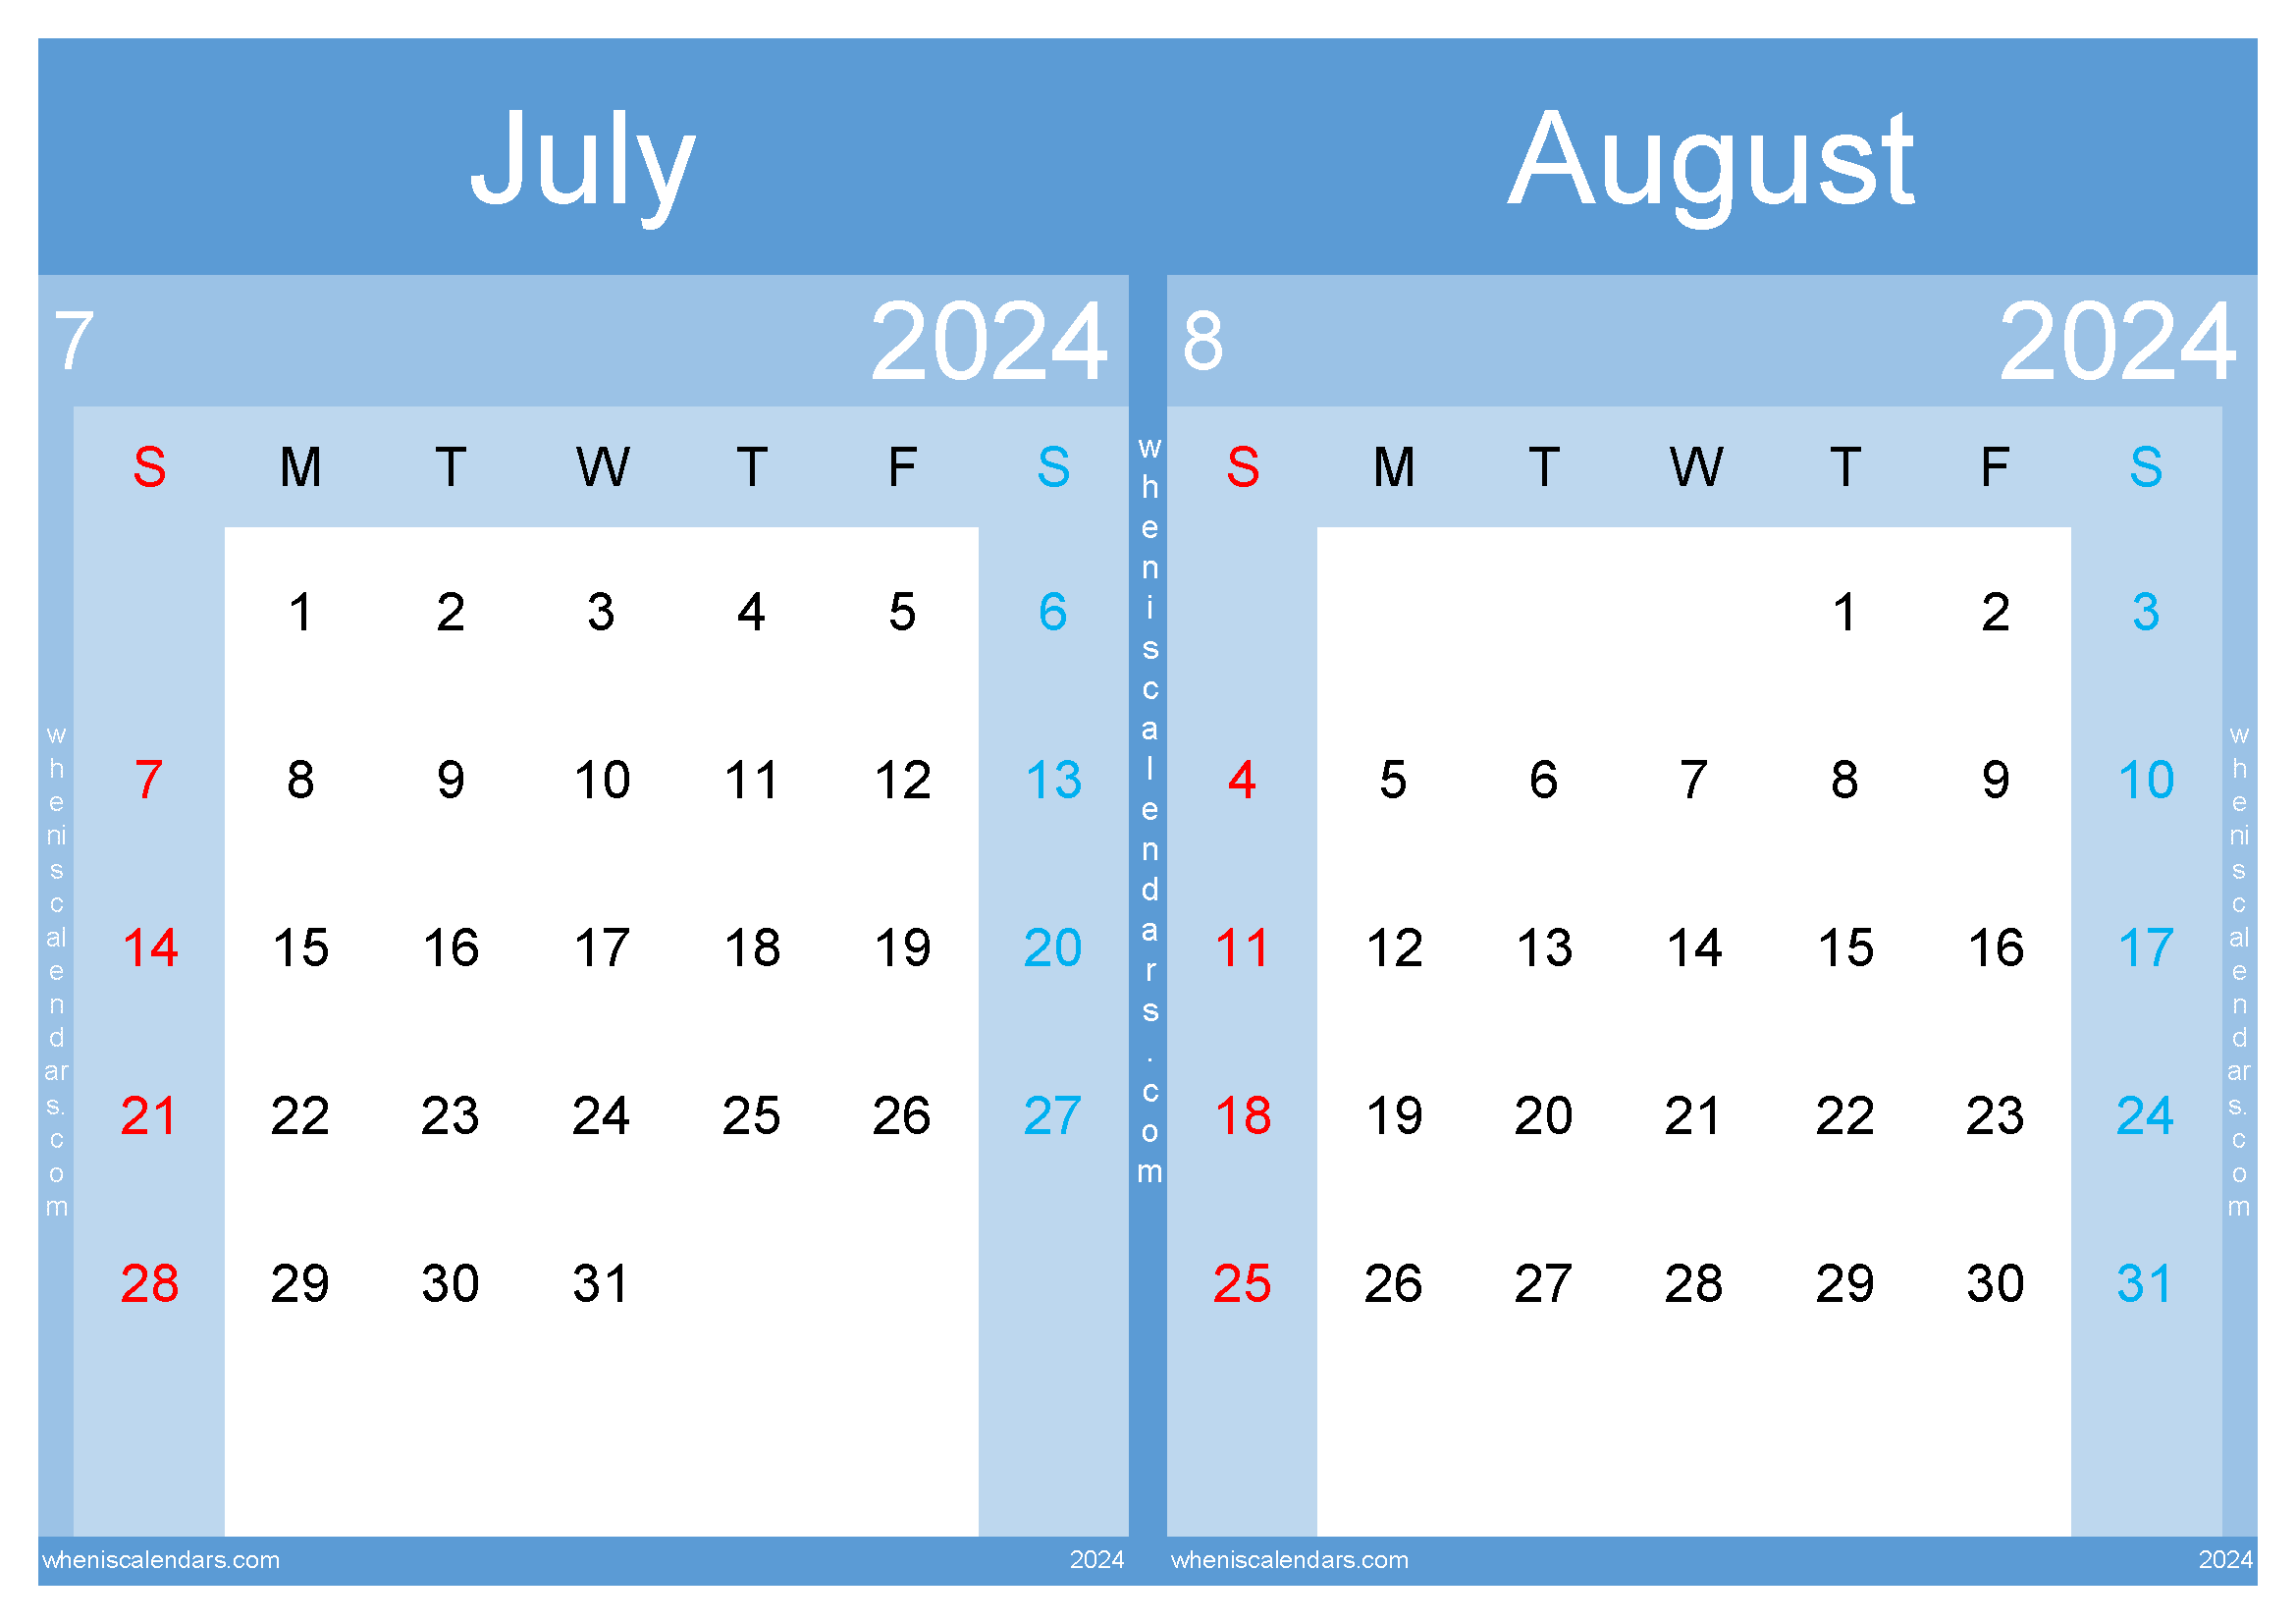 Download calendar of July and August 2024 A4 JA24038